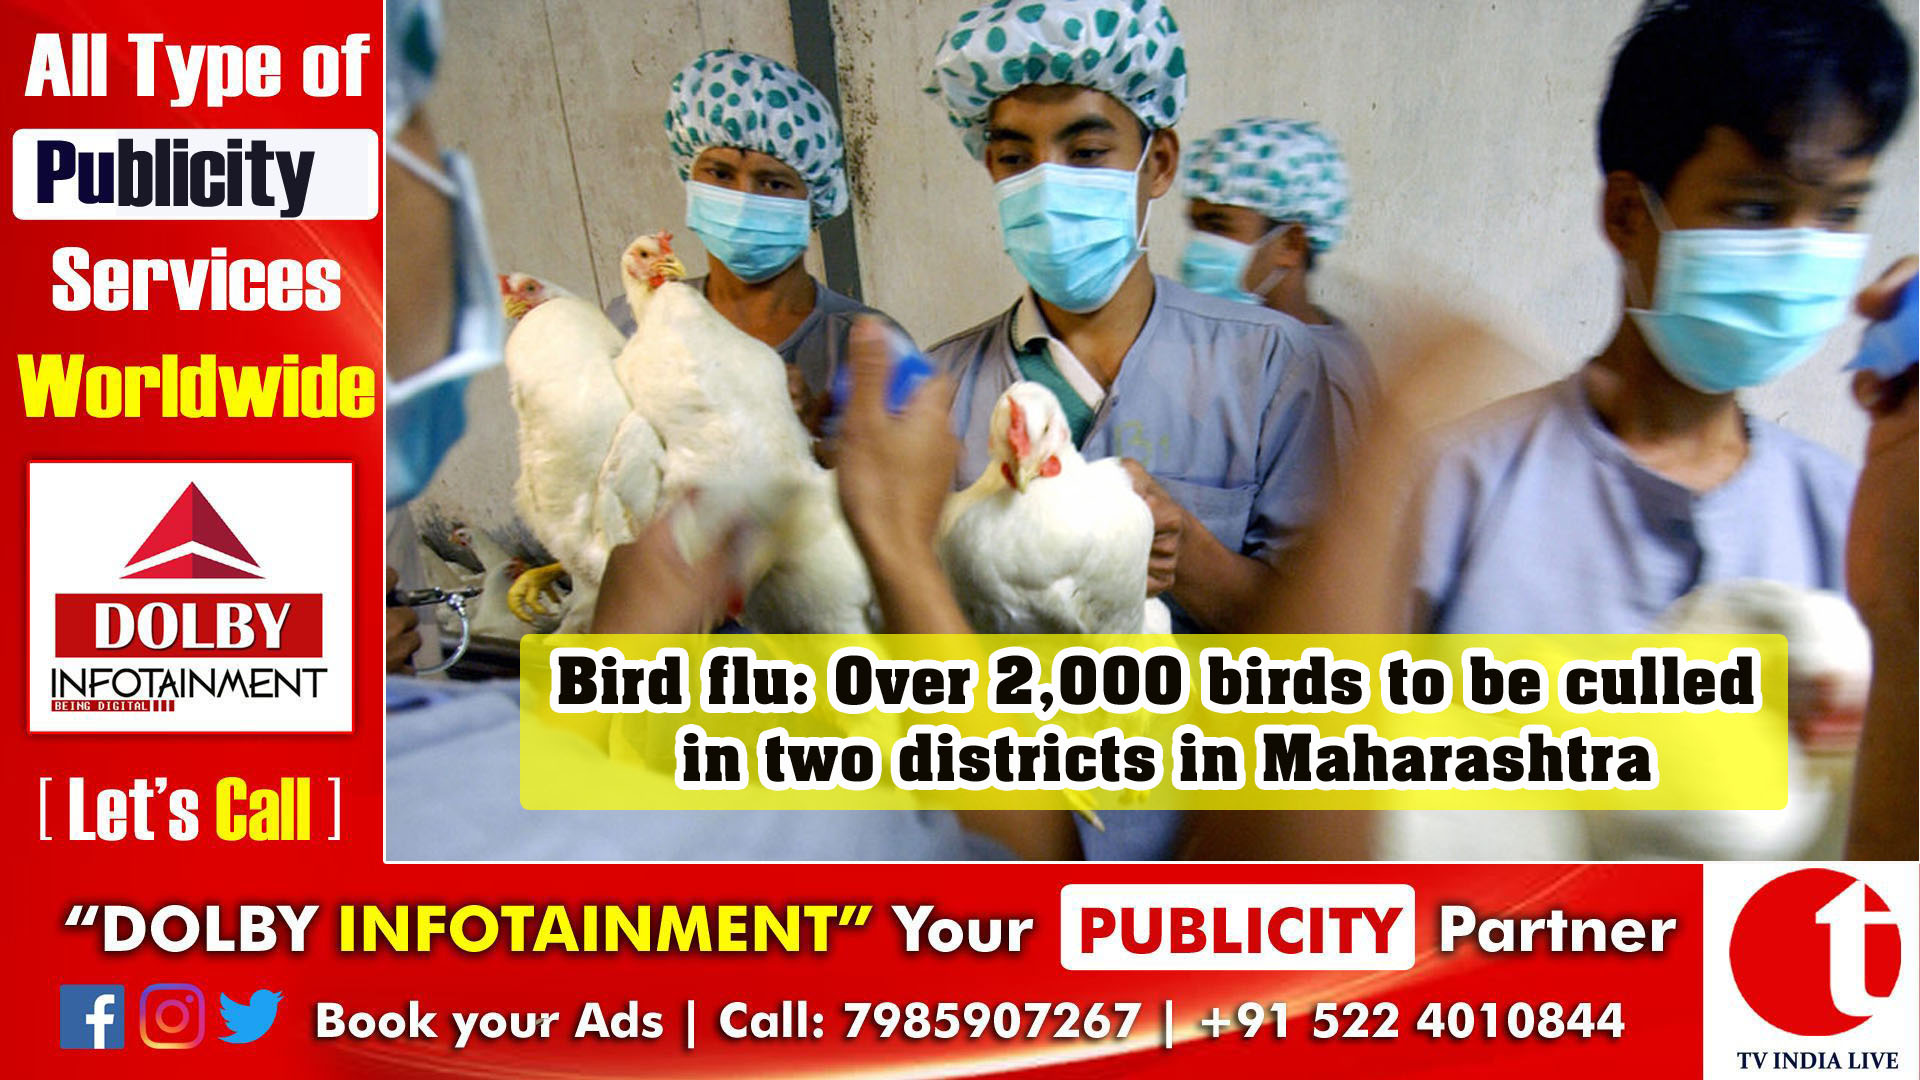 Bird flu: Over 2,000 birds to be culled in two districts in Maharashtra